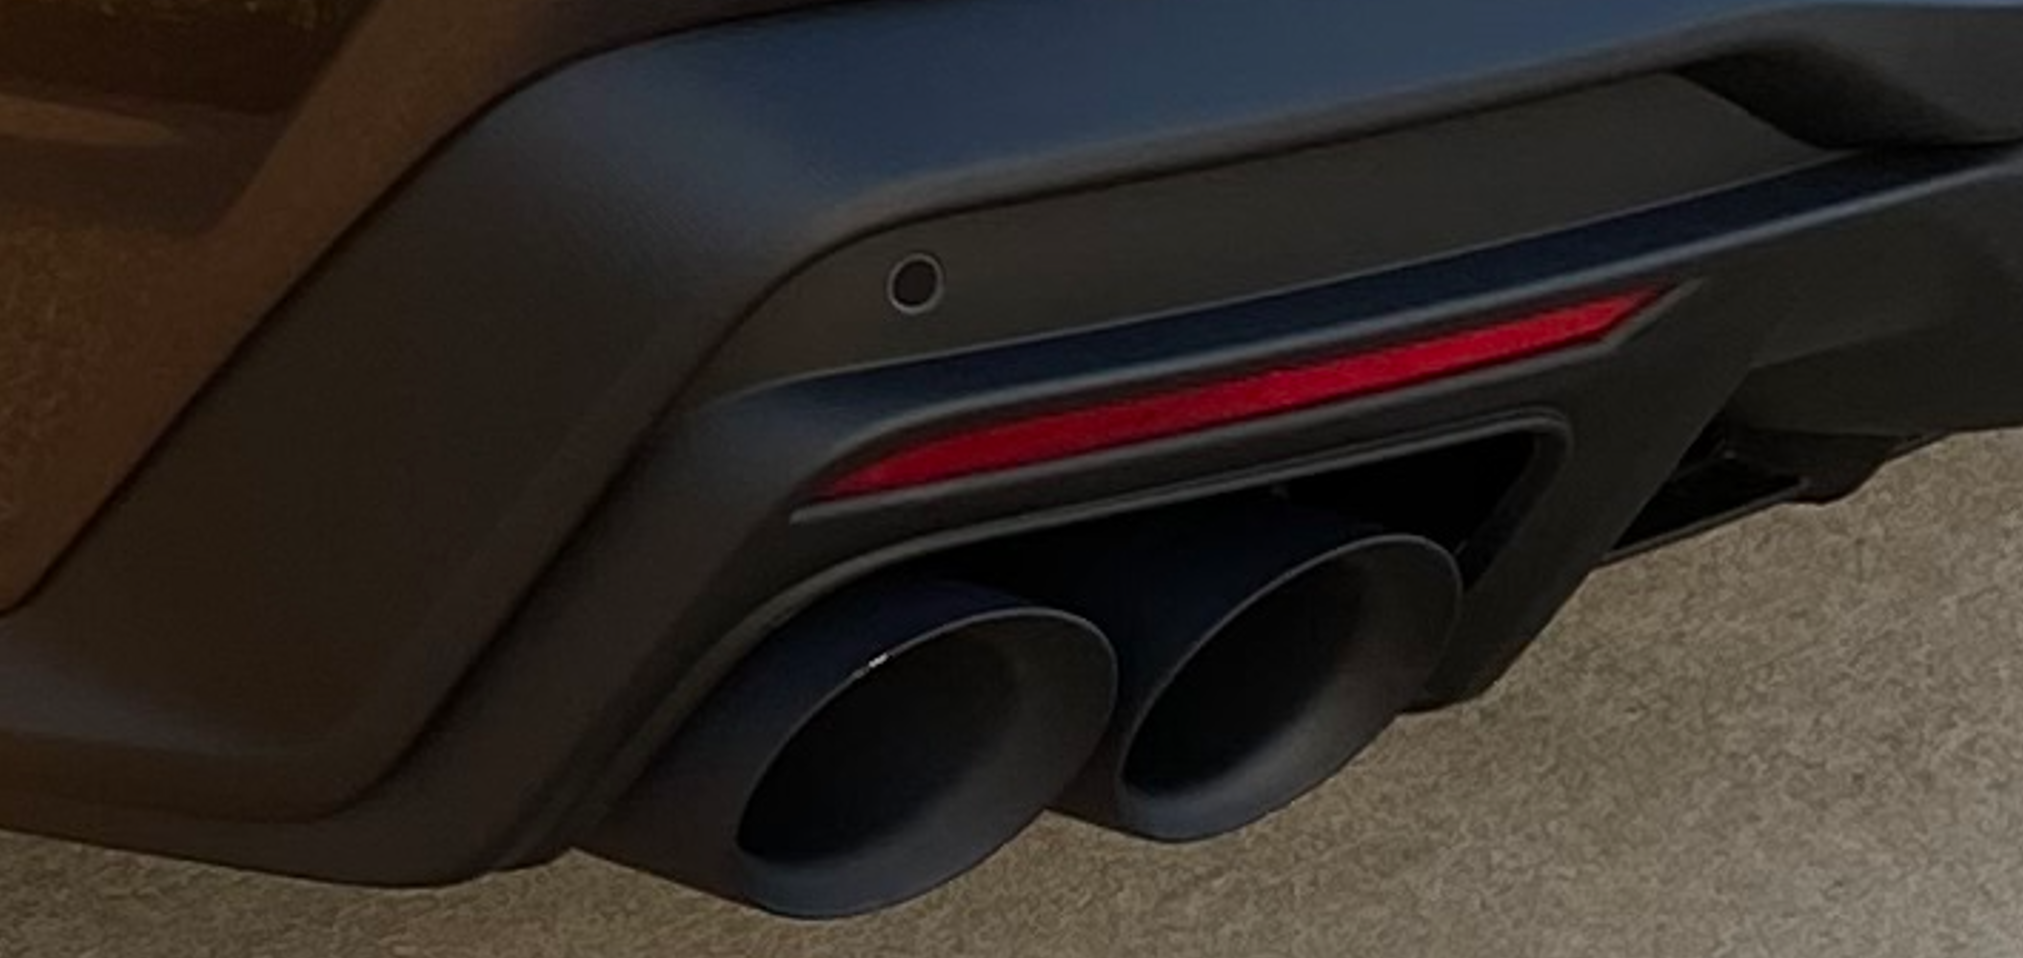 S650 Mustang Paint type and color for Dark Horse exhaust tips? Tips